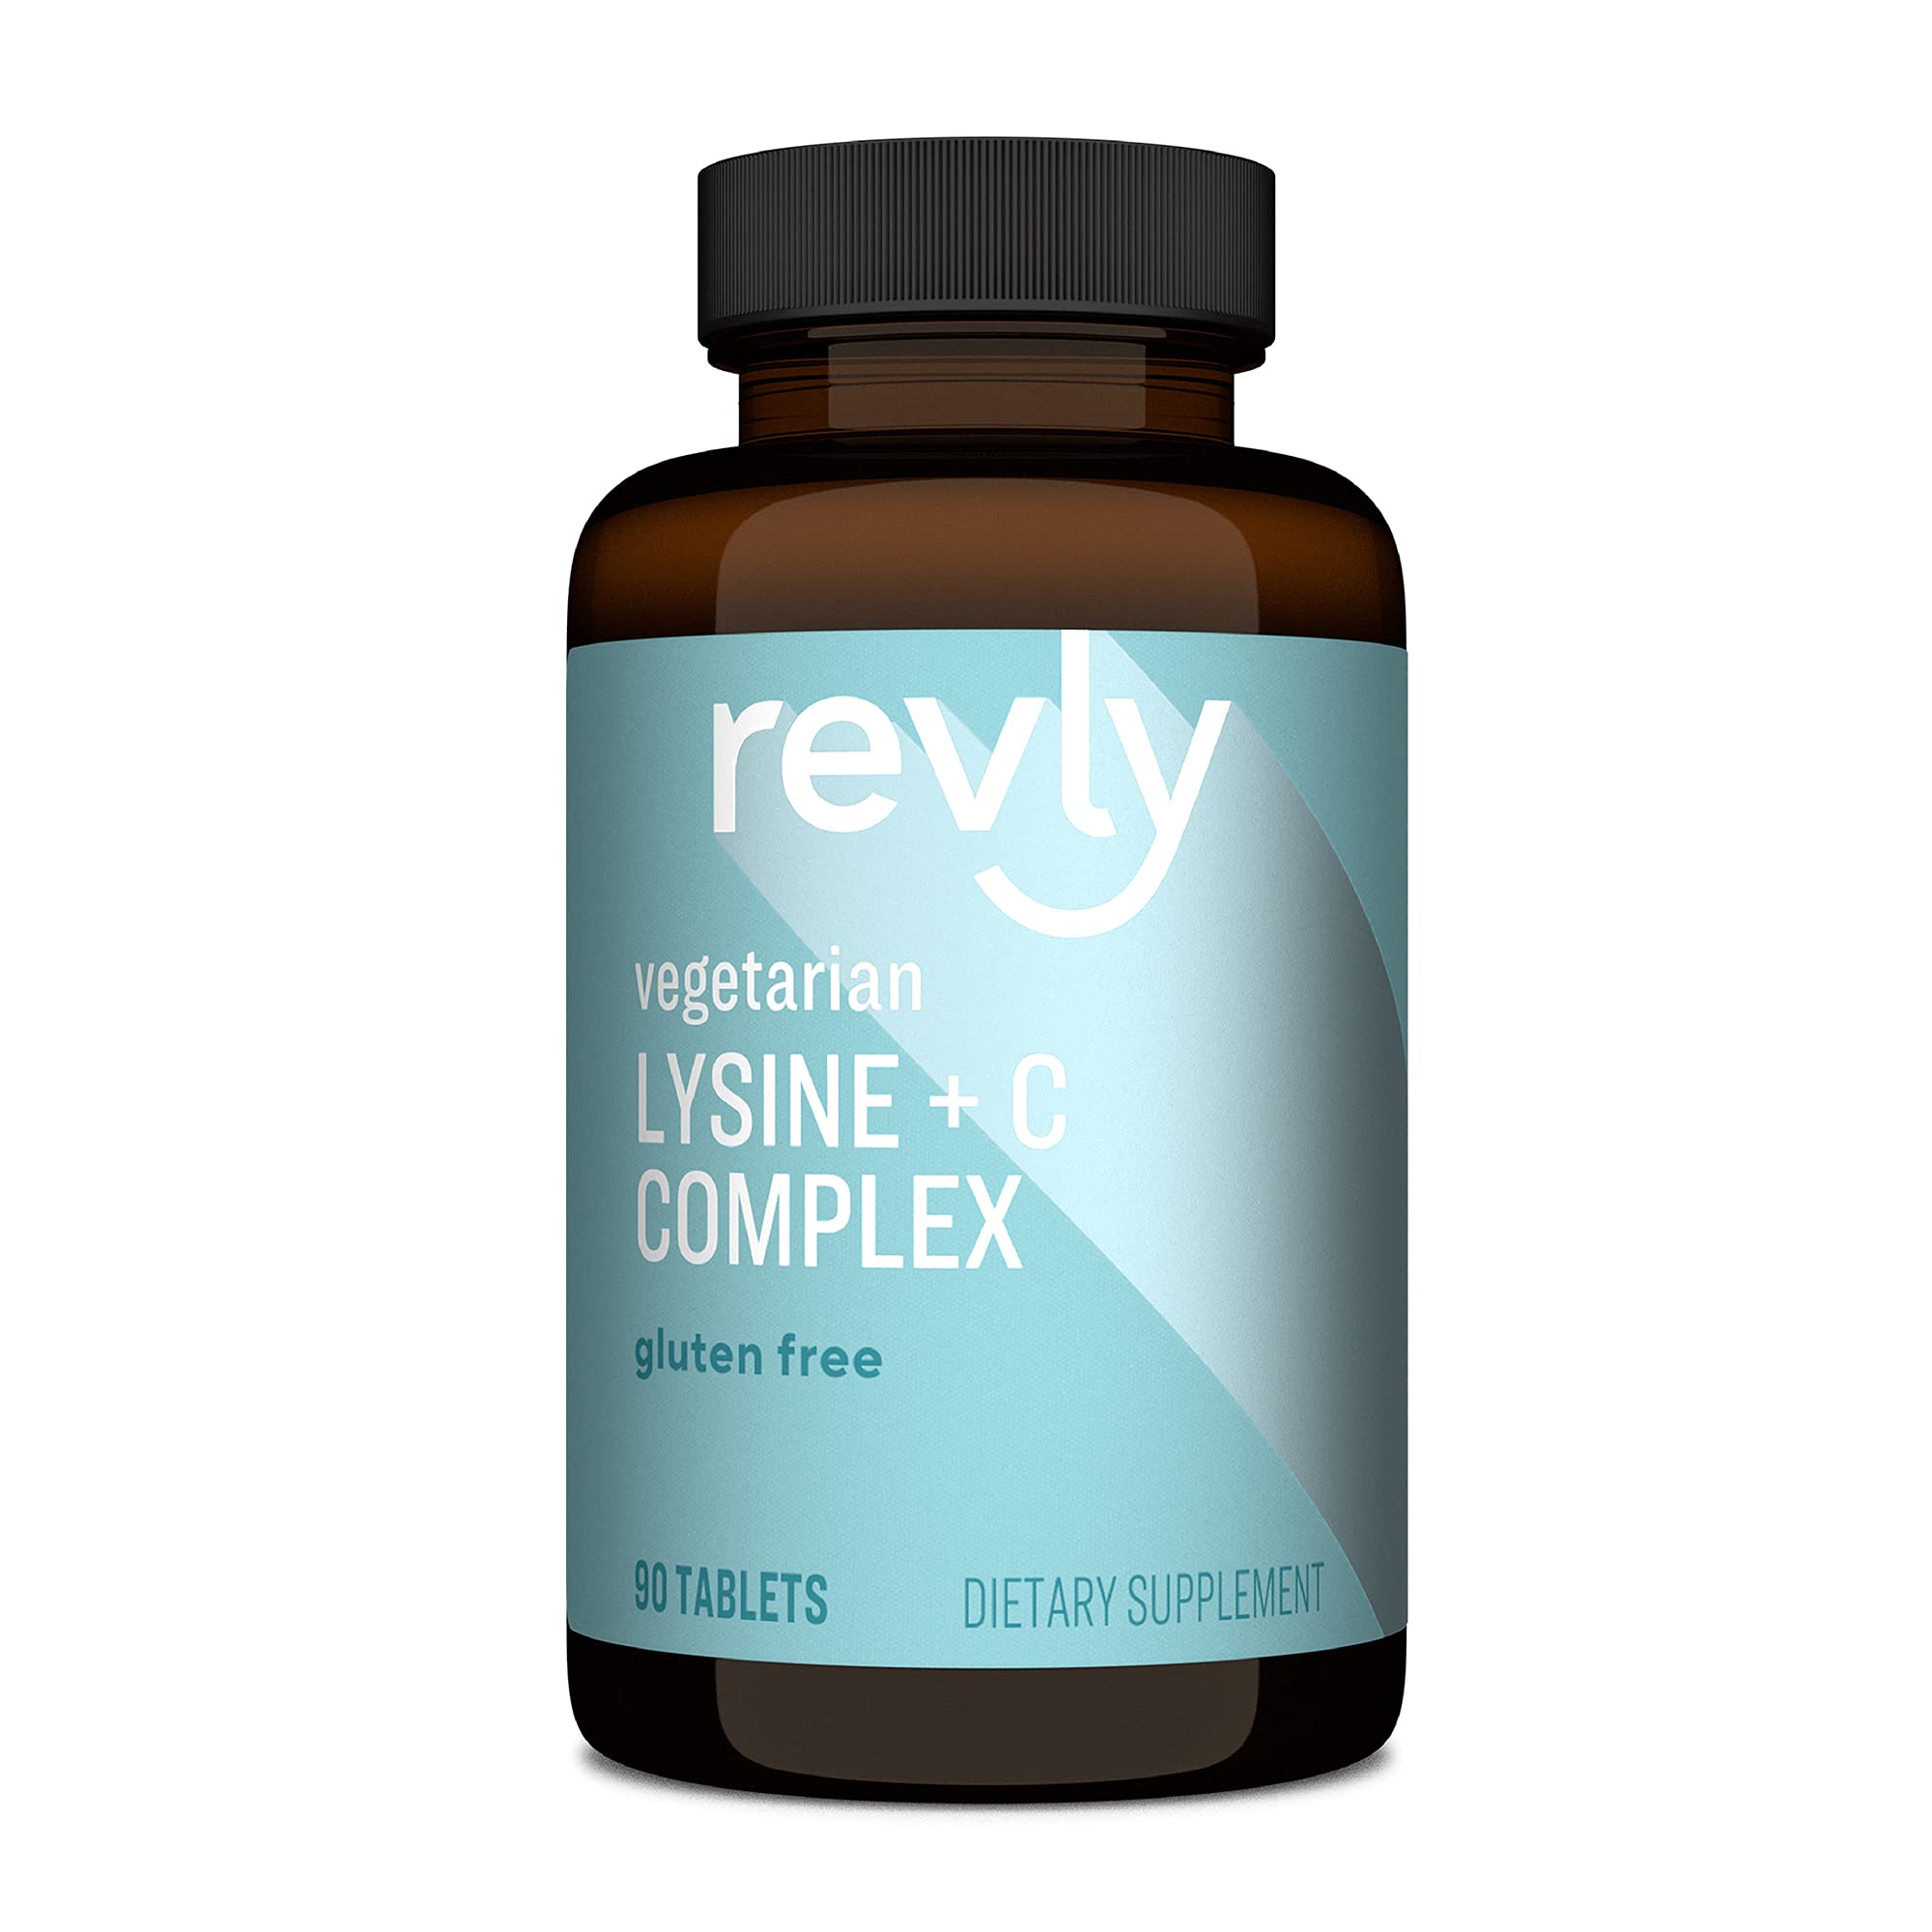 Amazon Brand - Revly Lysine + C Complex (1000 mg L-Lysine and 66 mg Vitamin C) (2 per Serving), Supports Immune Health, 90 Tablets, Gluten Free